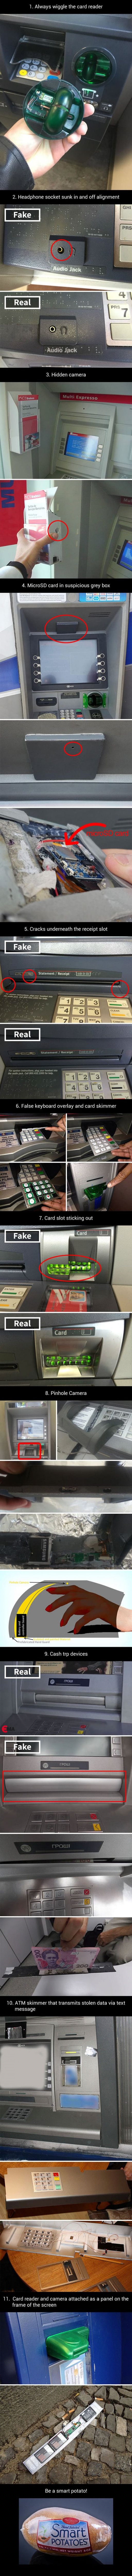 ATM Scams You Need To Be Aware Of